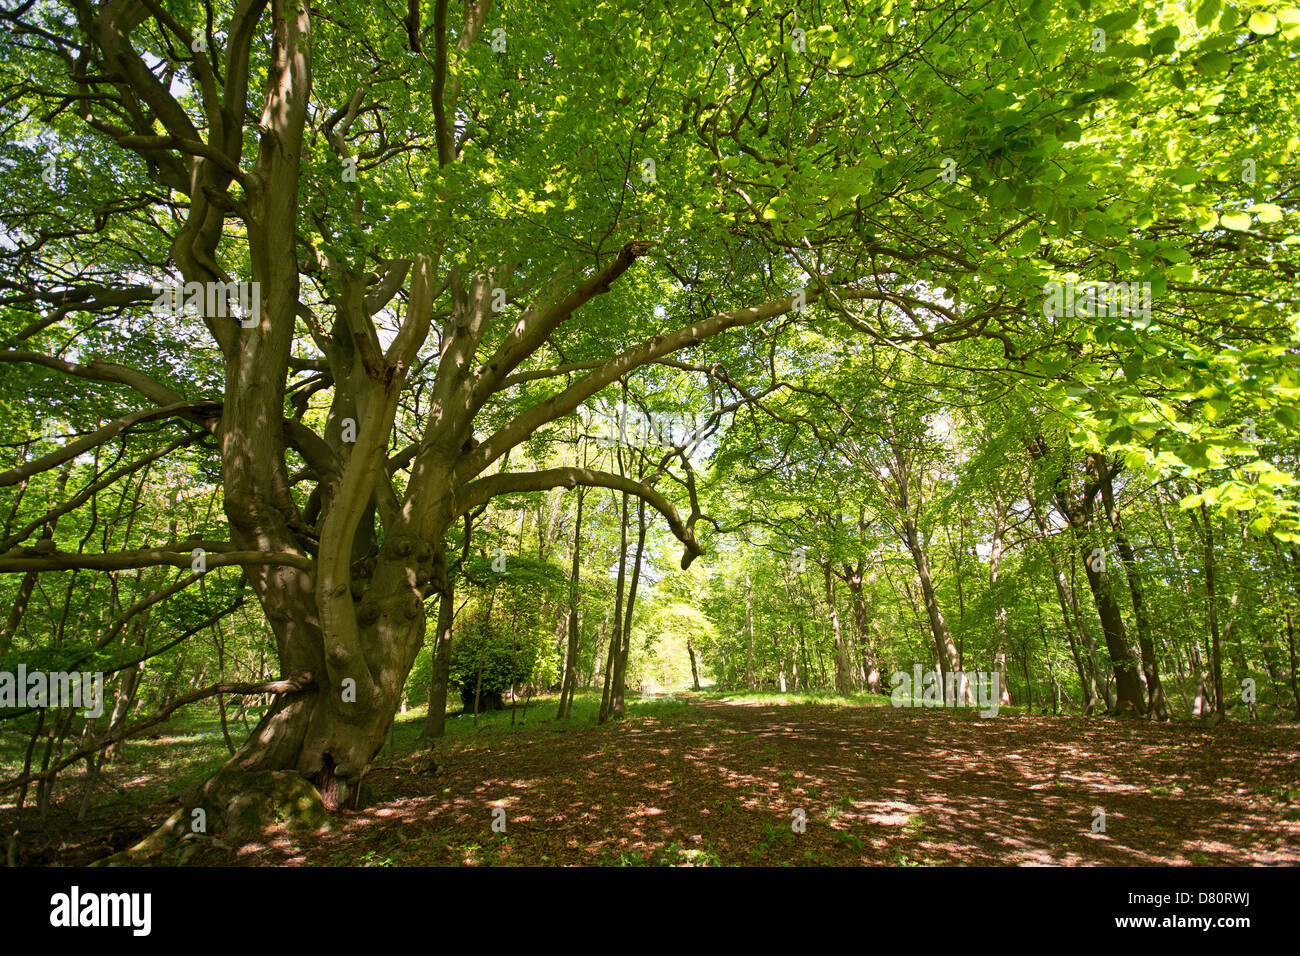 OXFORDSHIRE, UK. A shady tree-lined path in Wytham Woods near Oxford. 2013. Stock Photo